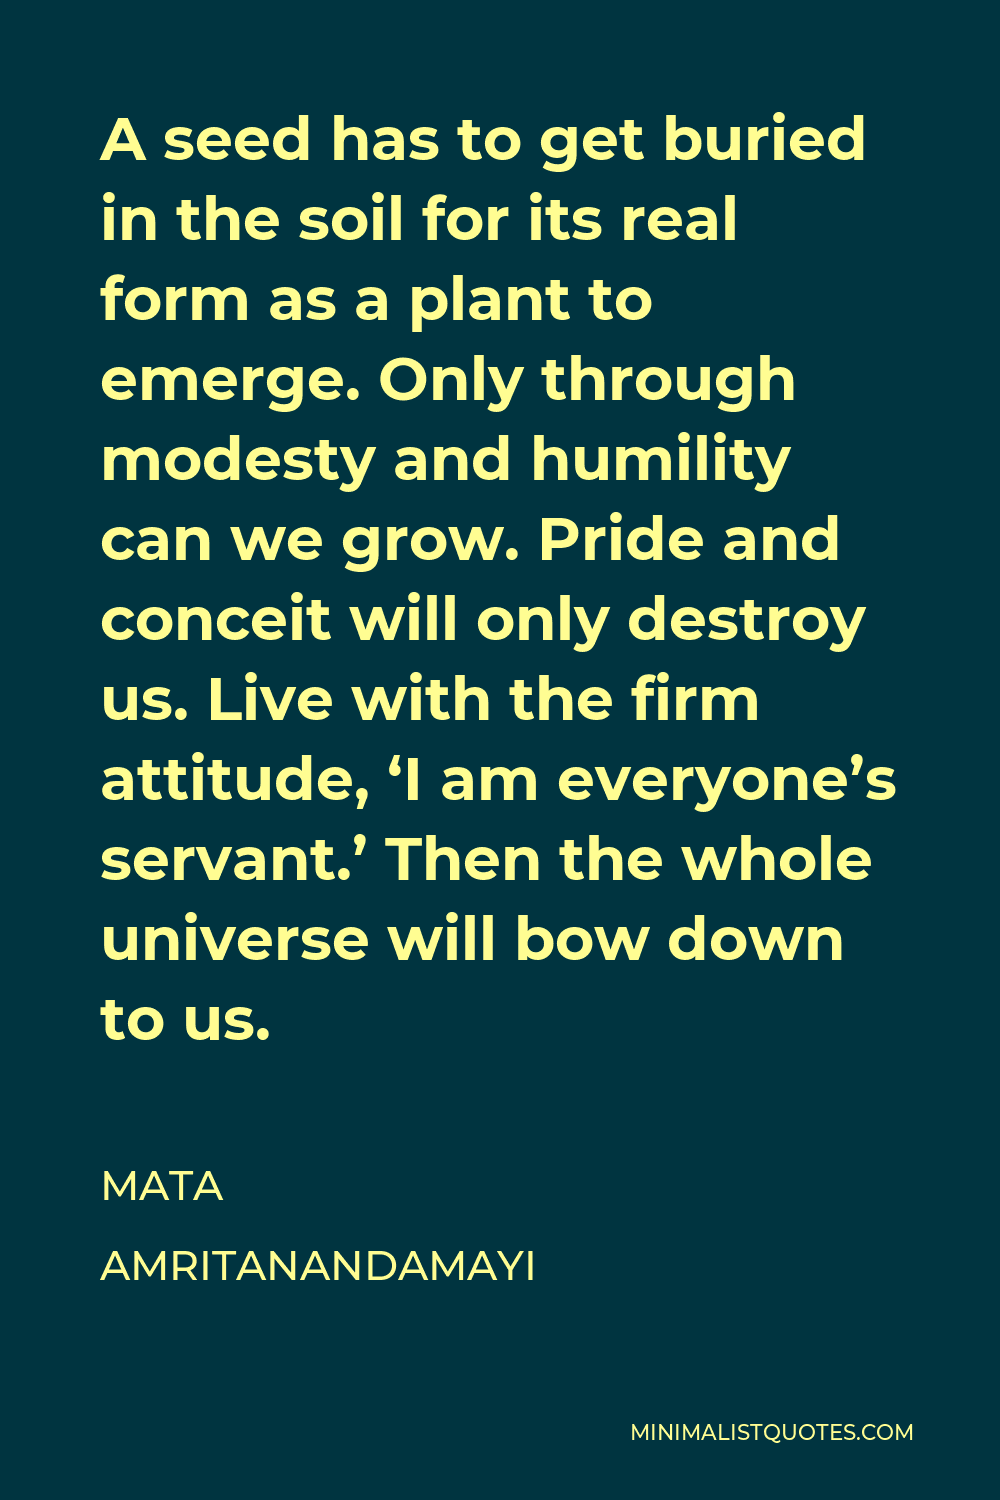 Mata Amritanandamayi Quote - A seed has to get buried in the soil for its real form as a plant to emerge. Only through modesty and humility can we grow. Pride and conceit will only destroy us. Live with the firm attitude, ‘I am everyone’s servant.’ Then the whole universe will bow down to us.